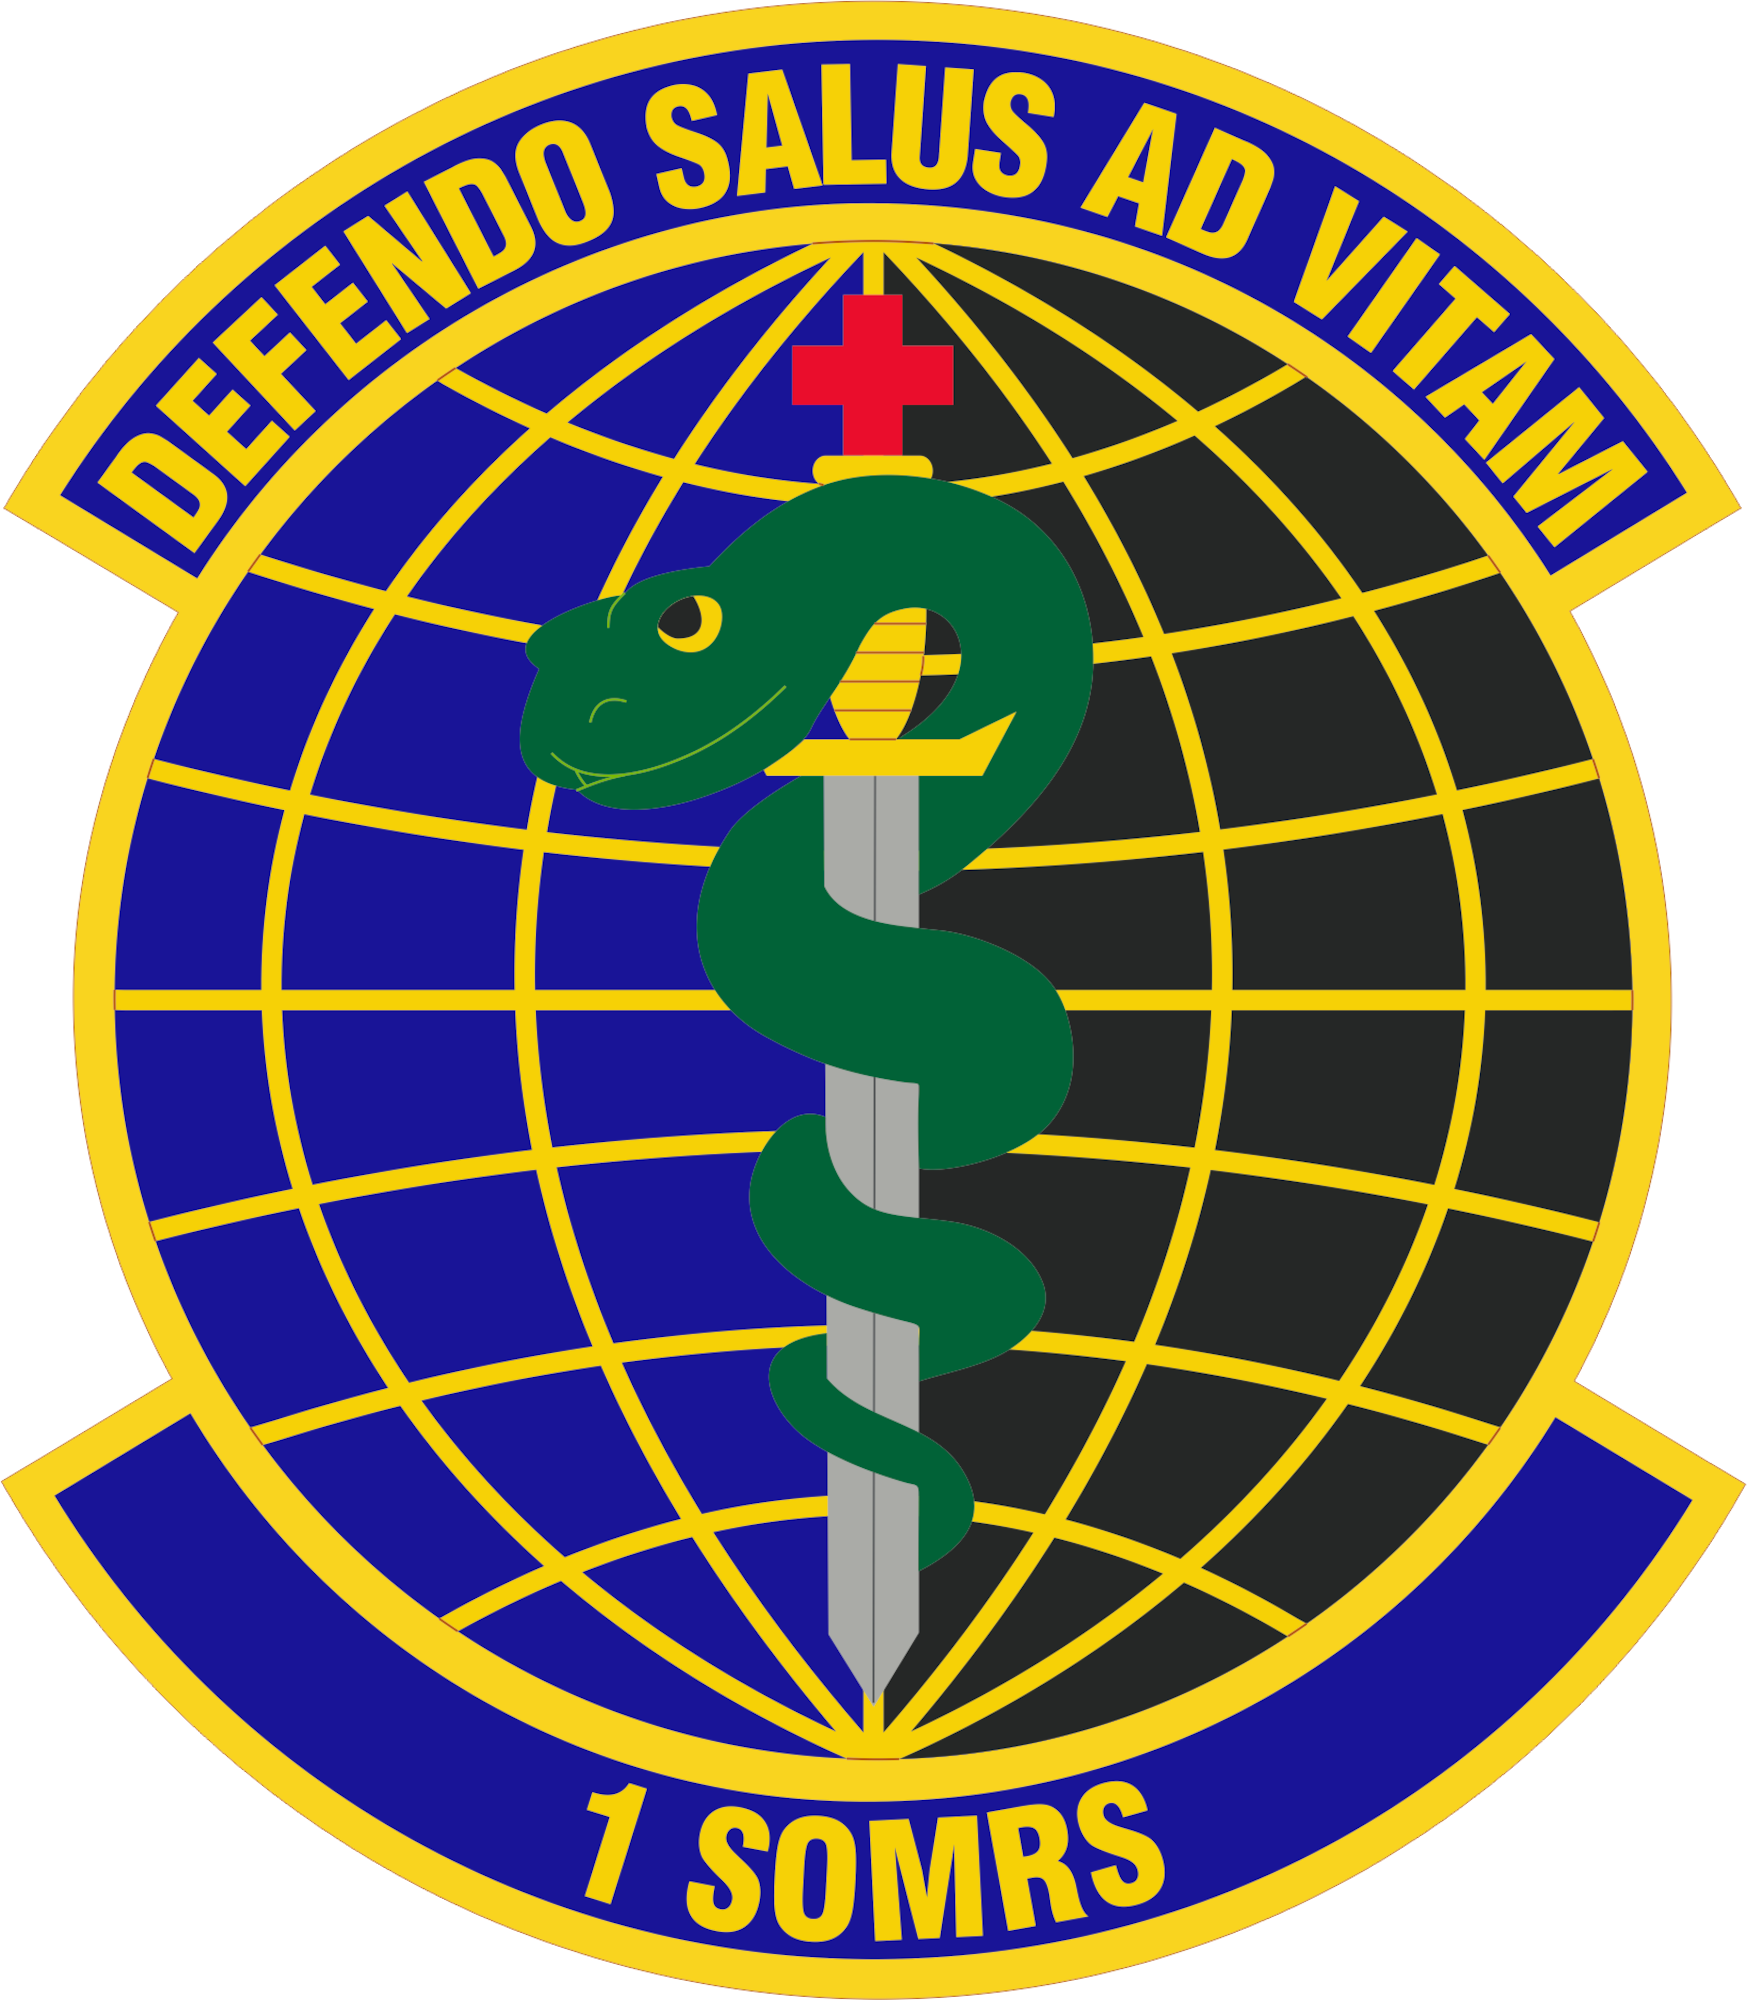 The 1st Special Operations Medical Readiness Squadron patch.